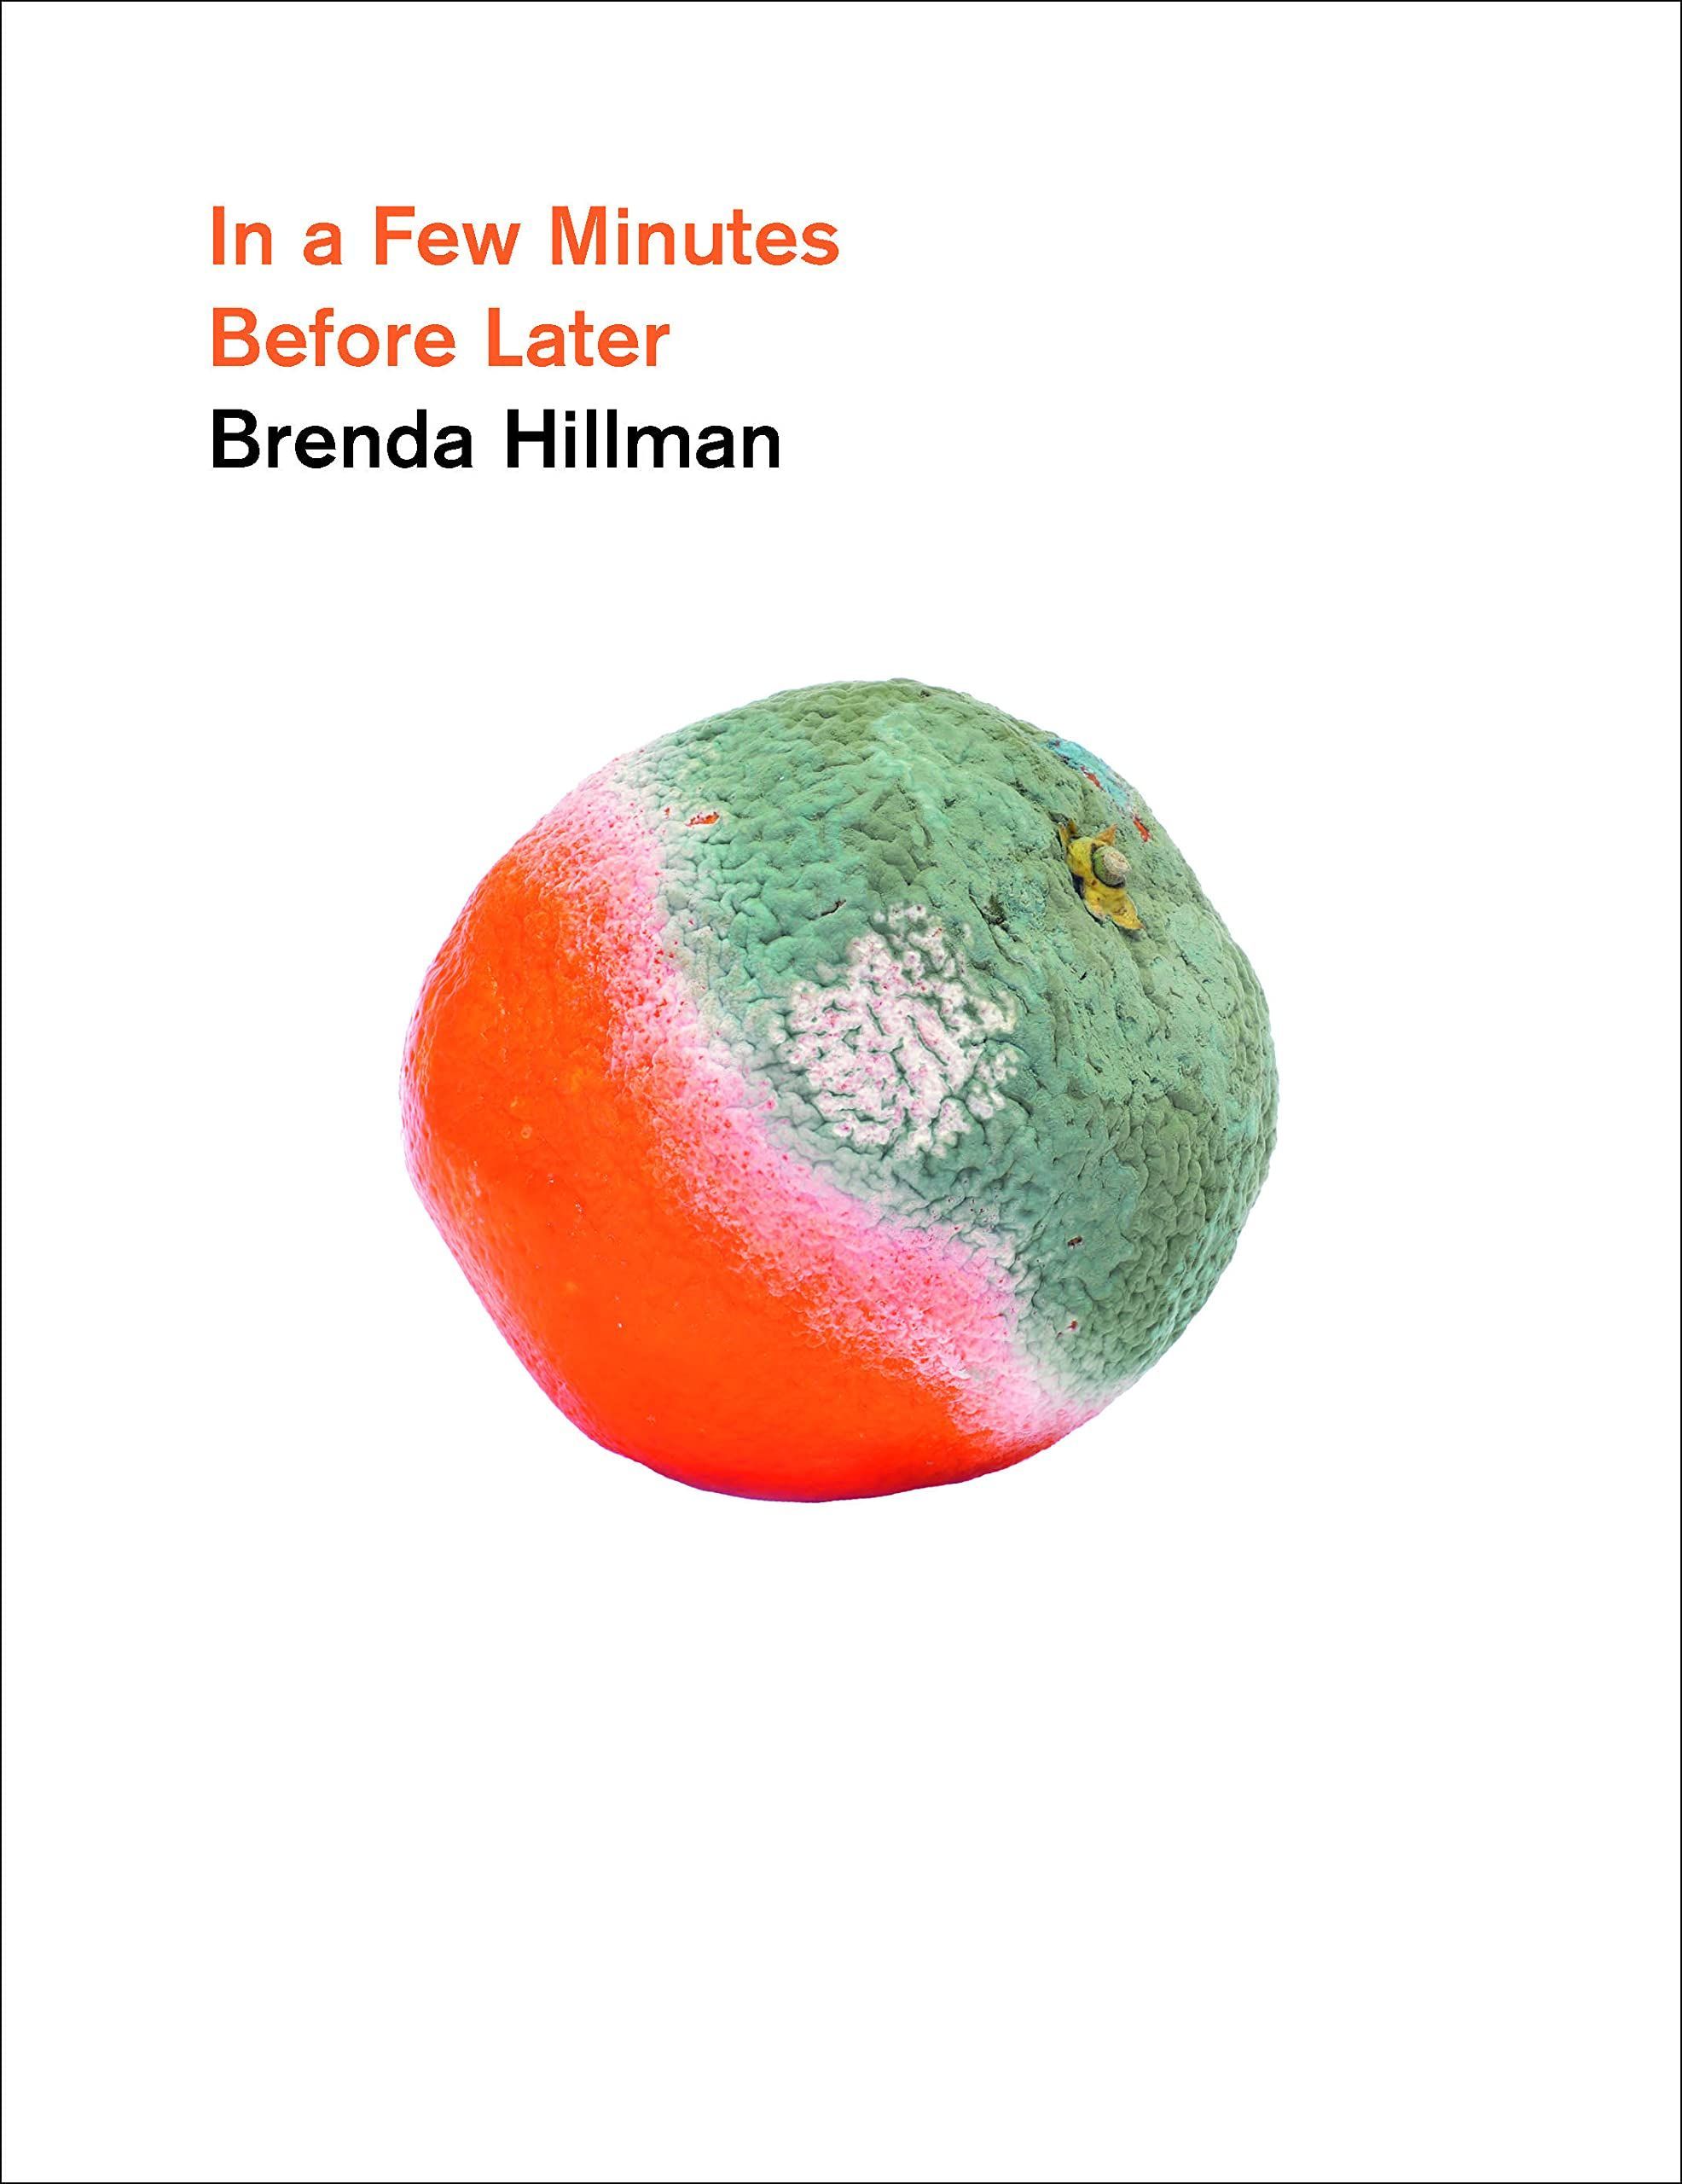 In a Garden of Zeroes: On Brenda Hillman’s “In a Few Minutes Before Later”